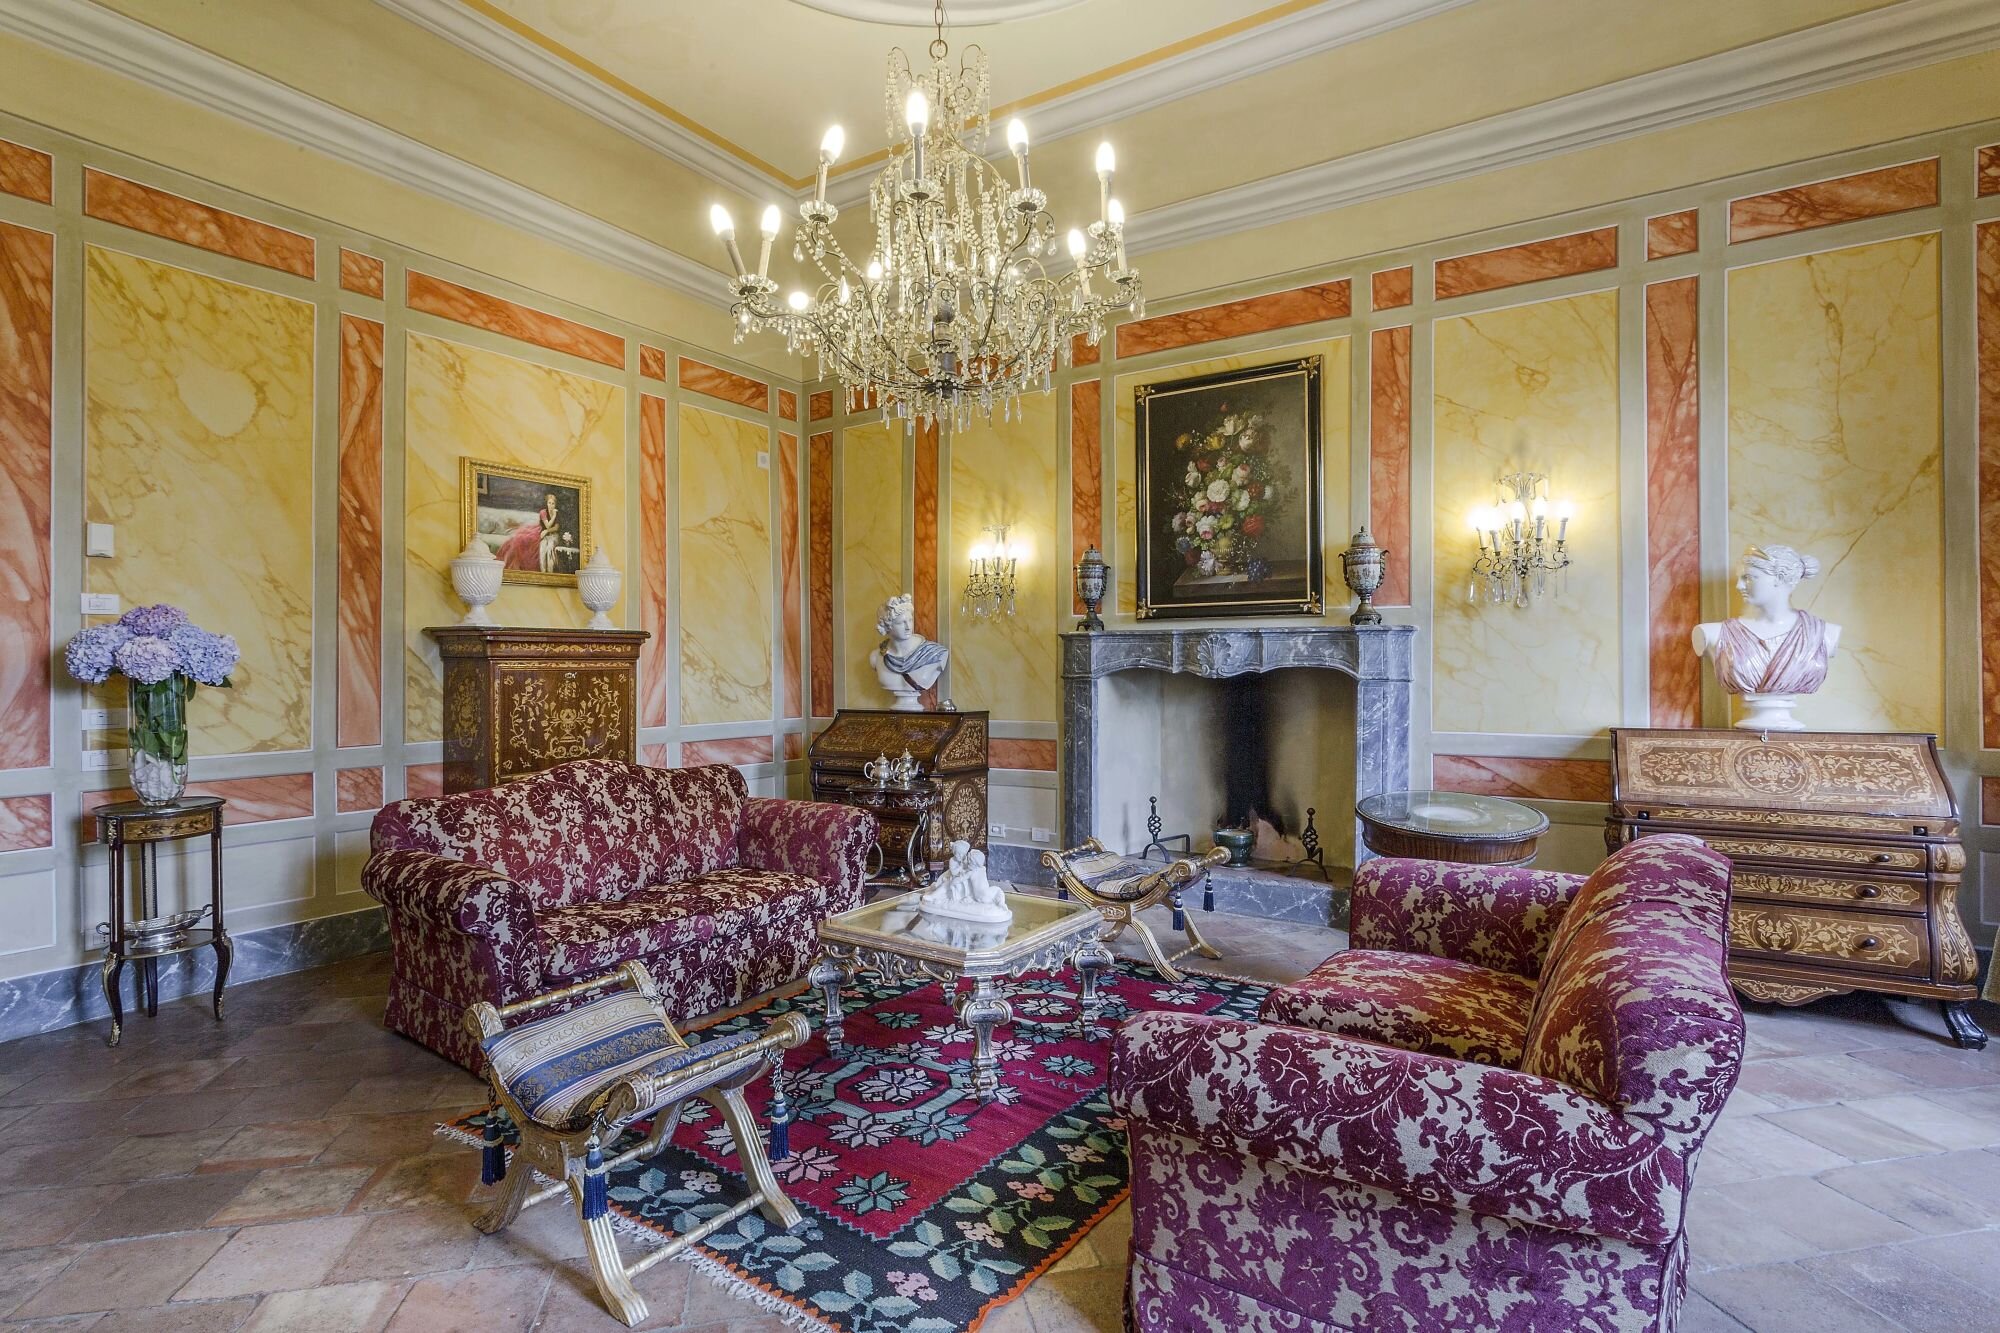 Francis York A Portfolio of Luxury Tuscan Villa Rentals is Coming to Auction19.jpeg